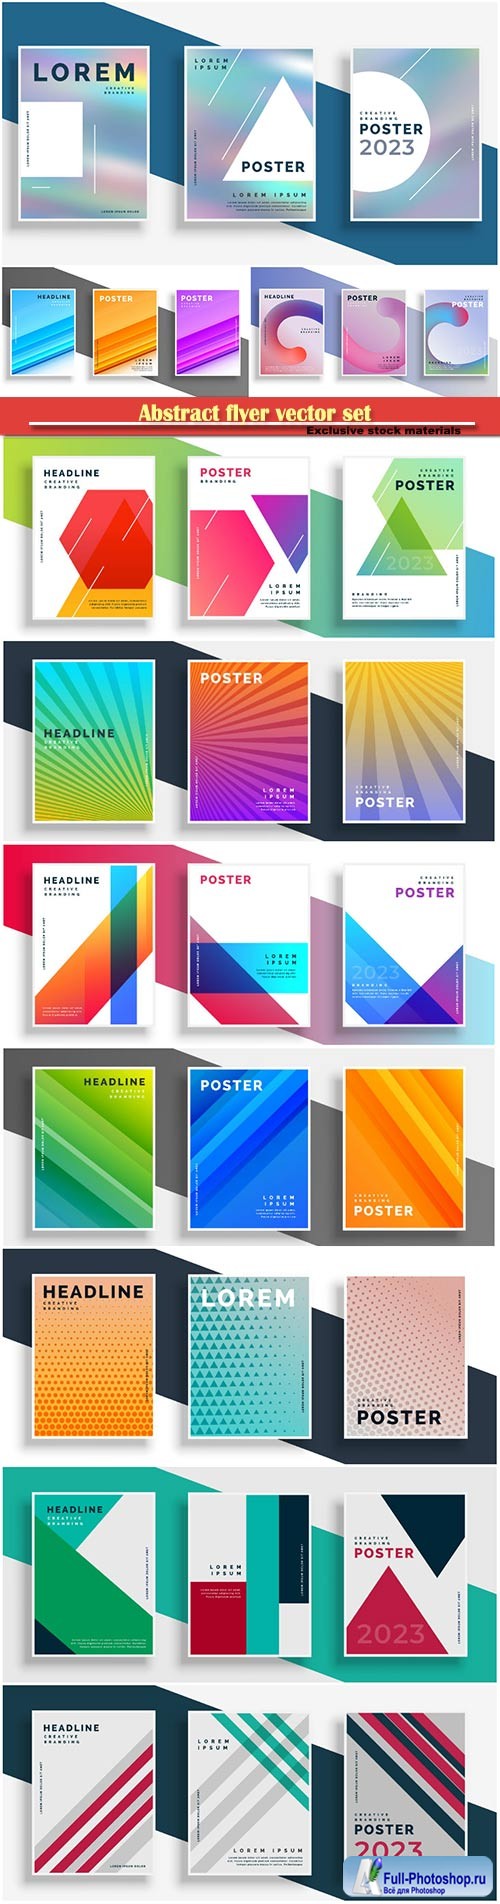 Abstract flyer vector set